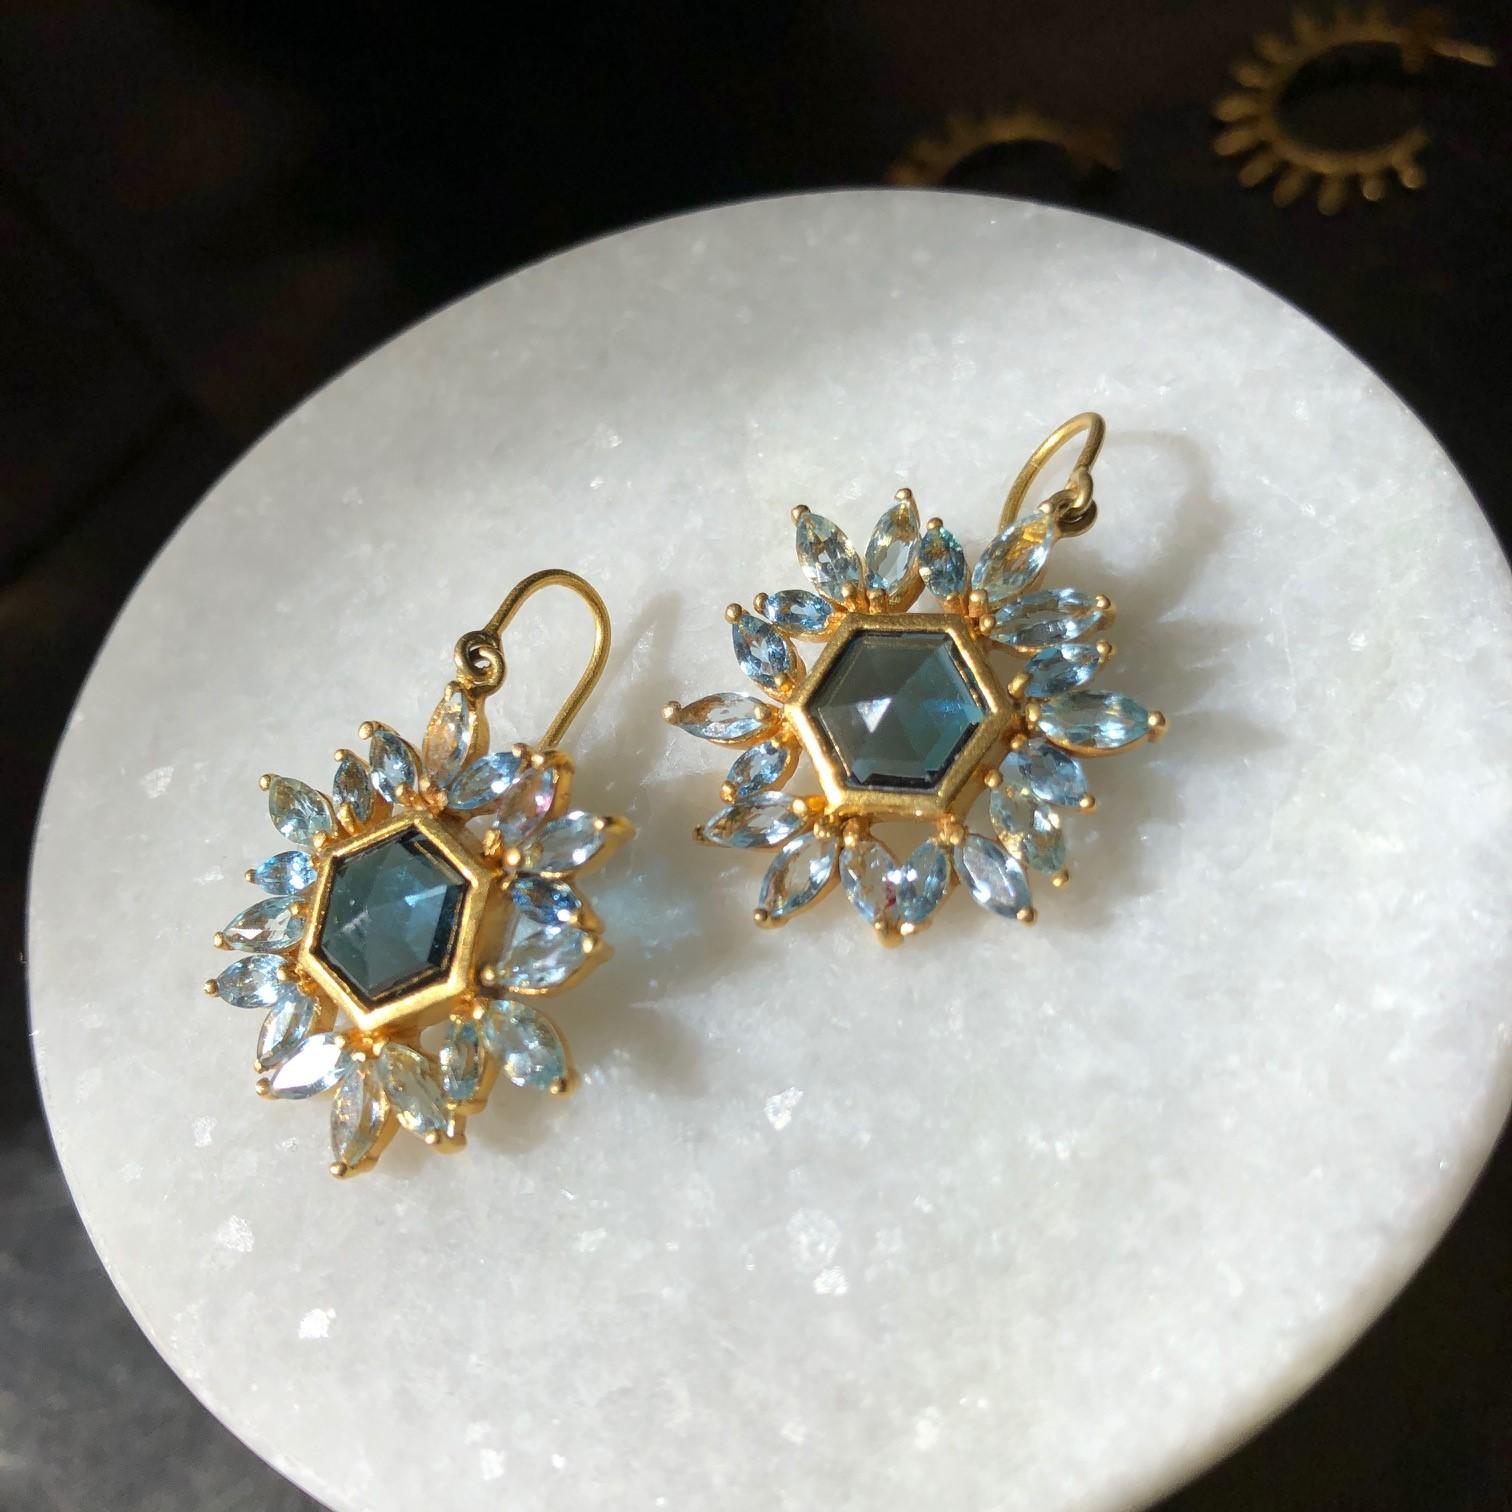 Lauren Harper London Blue Topaz Hexagon center stone, surrounded by faceted marquis Aquamarine set in 18kt yellow Gold.  Earrings are lightweight and hang on earwire in 18kt Gold.  Ships directly from original designer, Lauren Harper, in beautiful